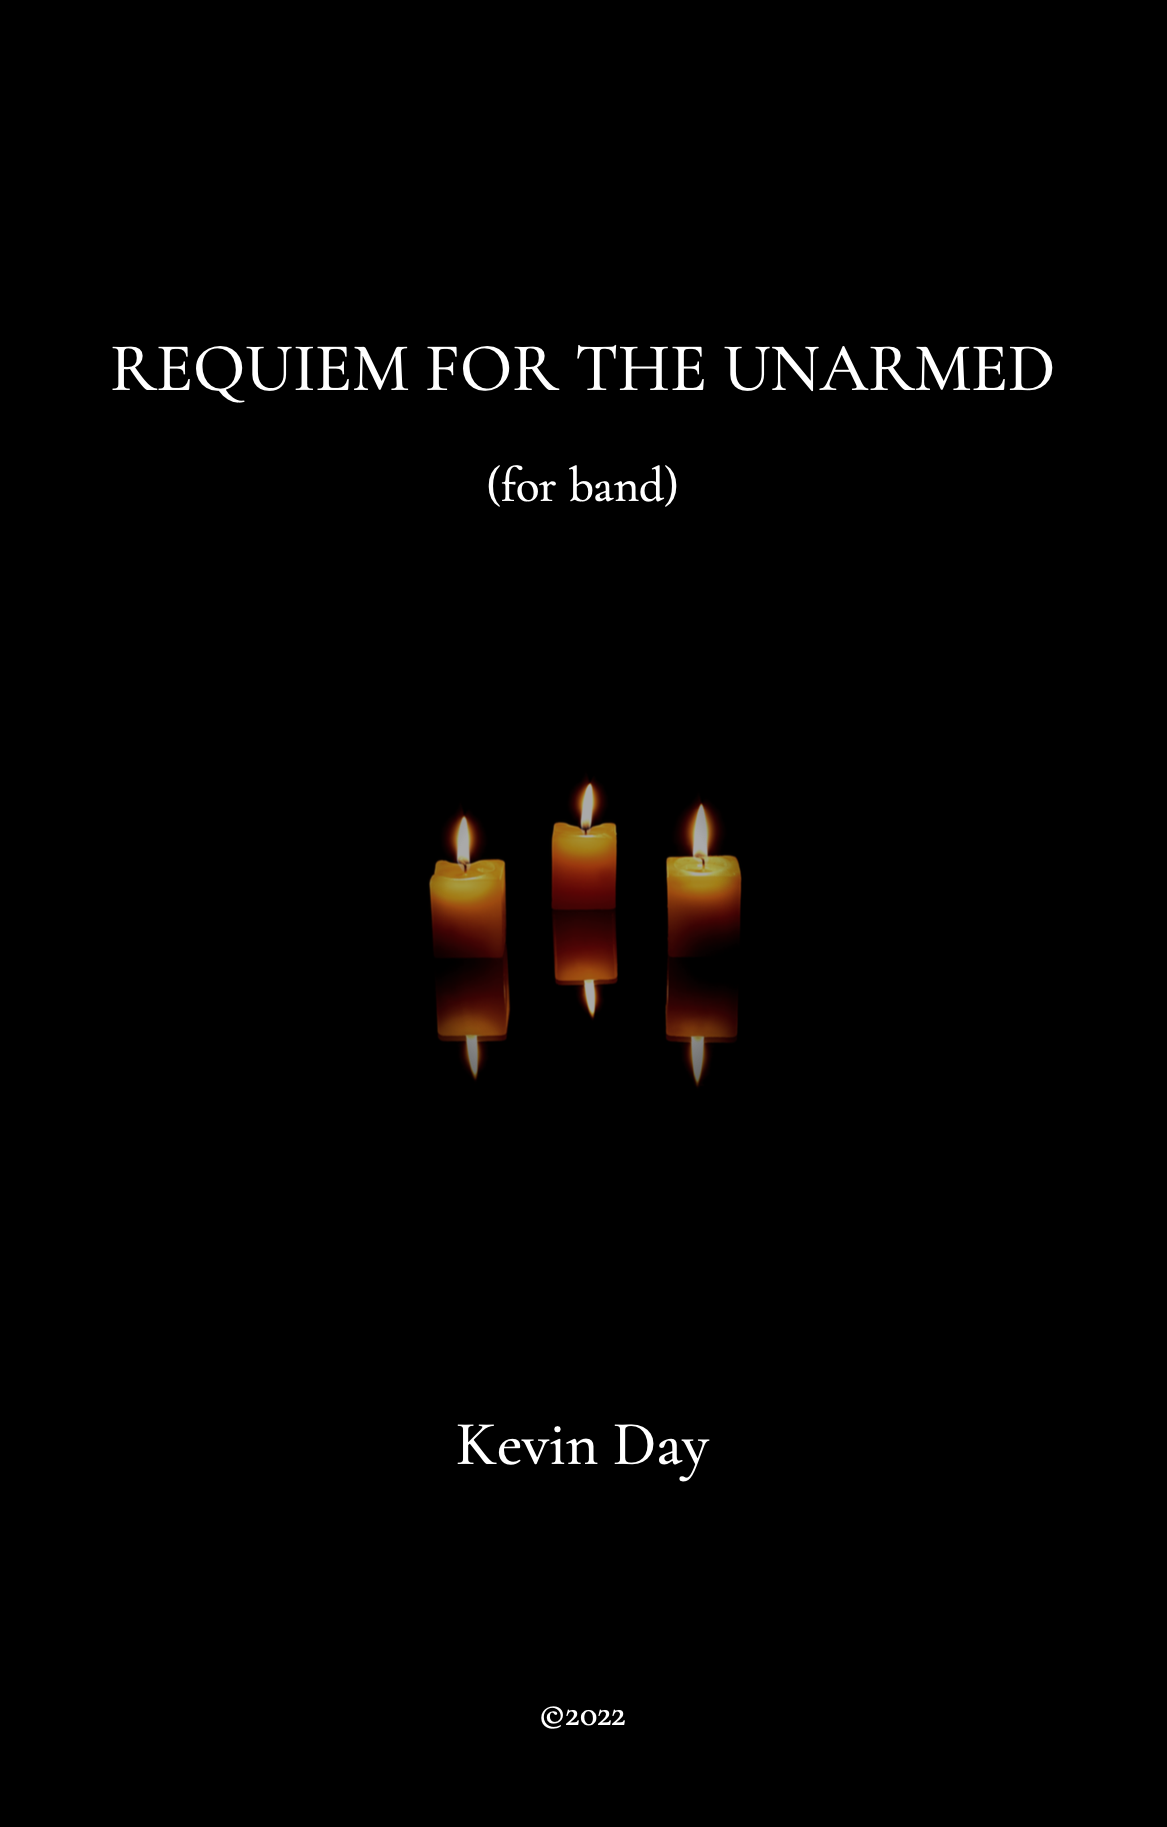 Requiem For The Unarmed by Kevin Day